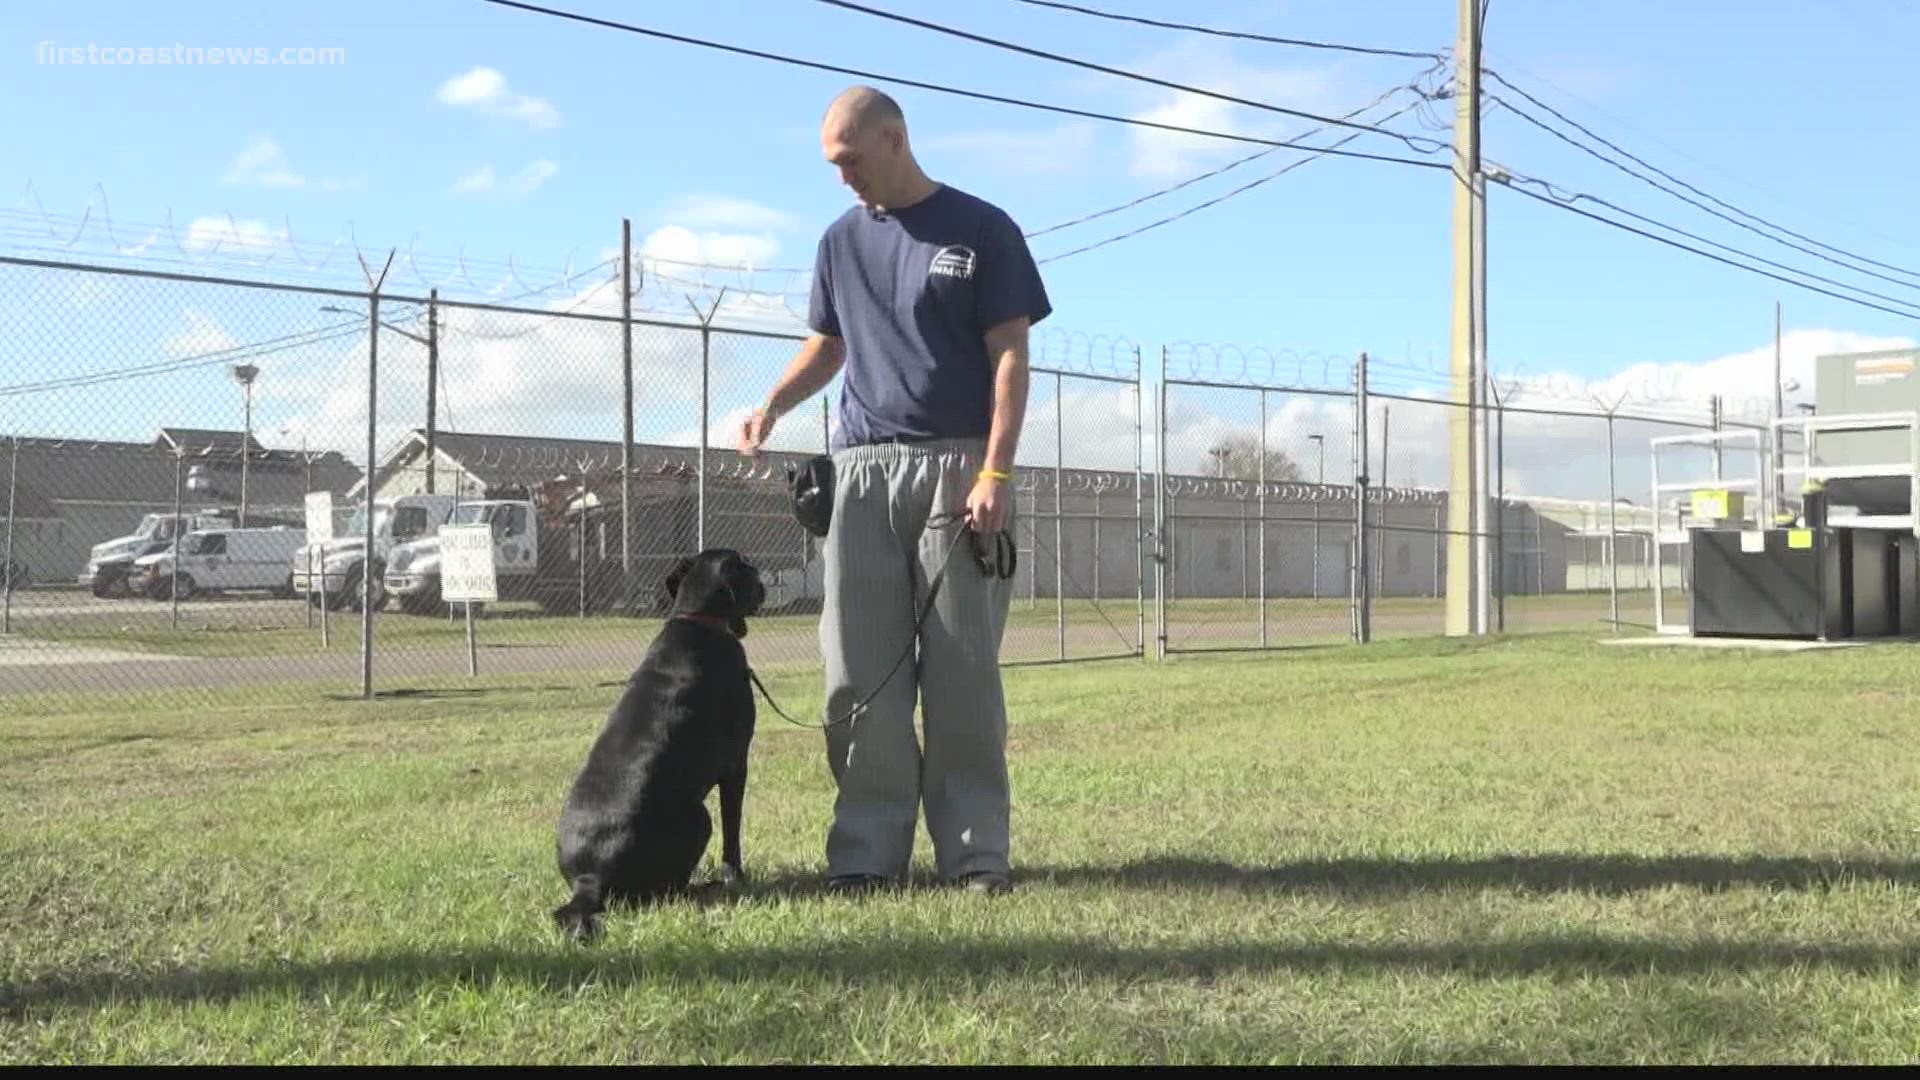 The group that supplies veterans with service dogs turns to inmates to train dogs.